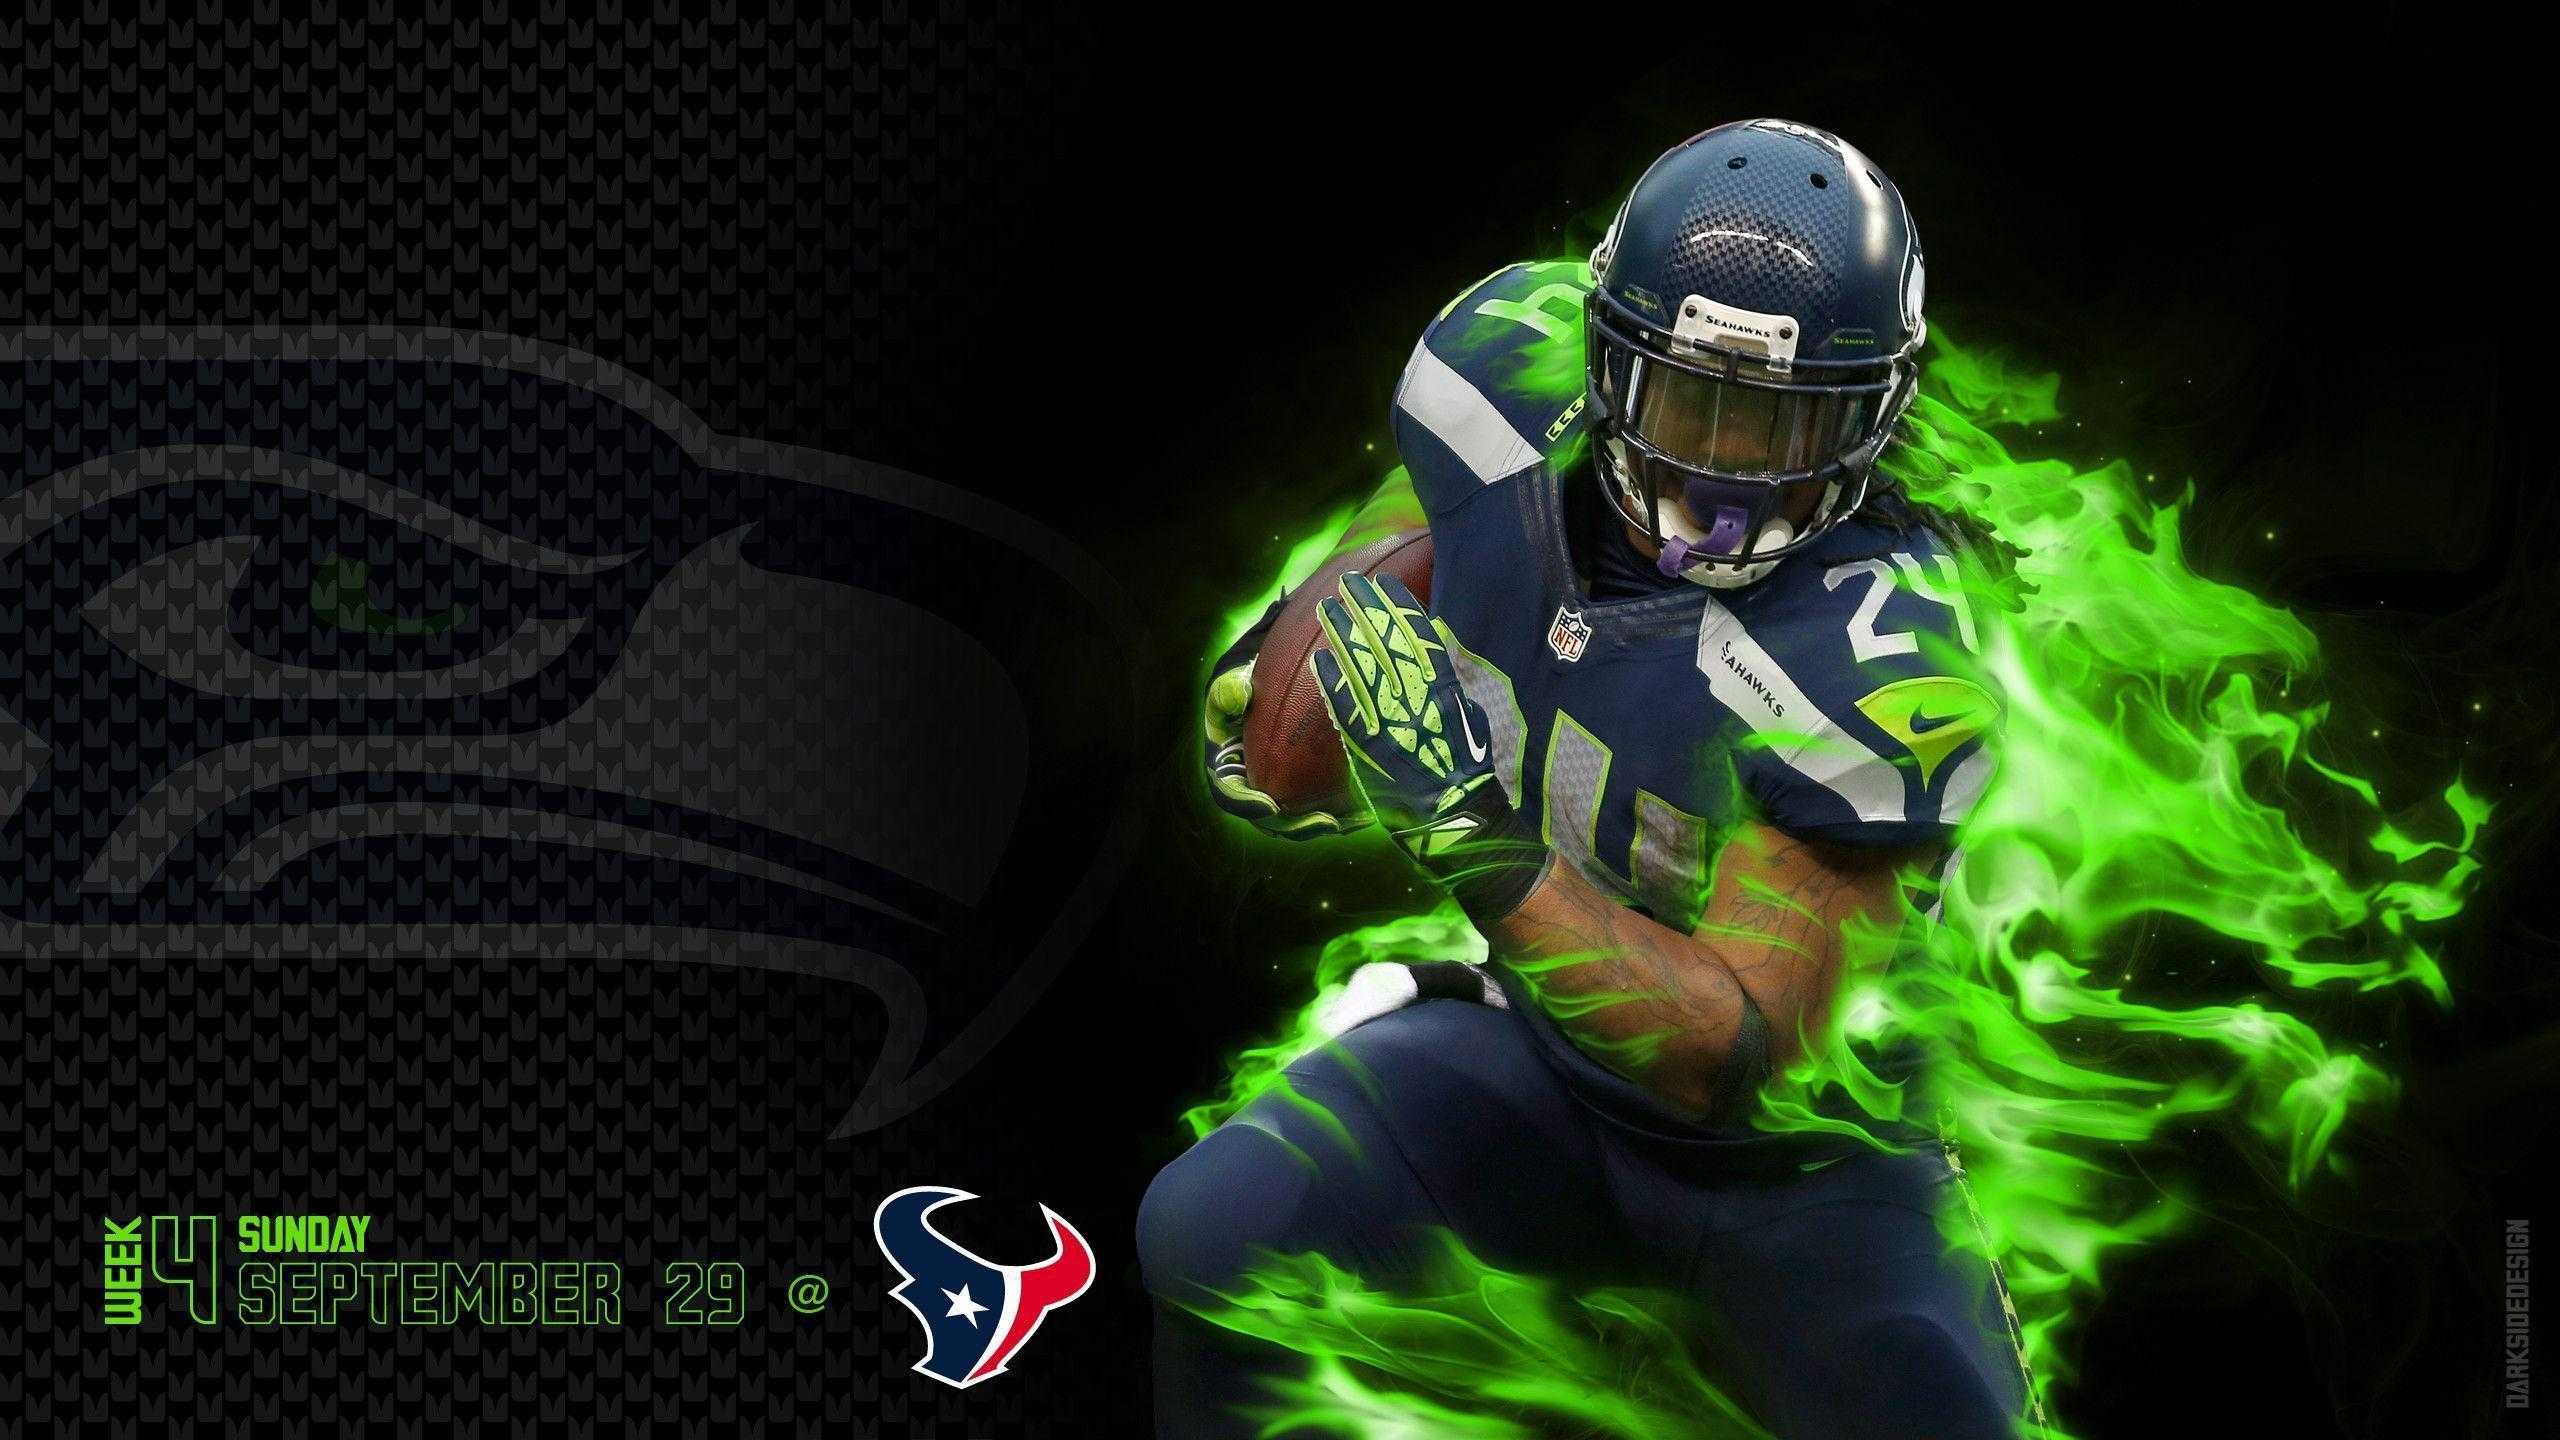 Cool Nfl Wallpapers And Football Wallpaper 2017 Images - Marshawn Lynch Wallpaper Hd - HD Wallpaper 